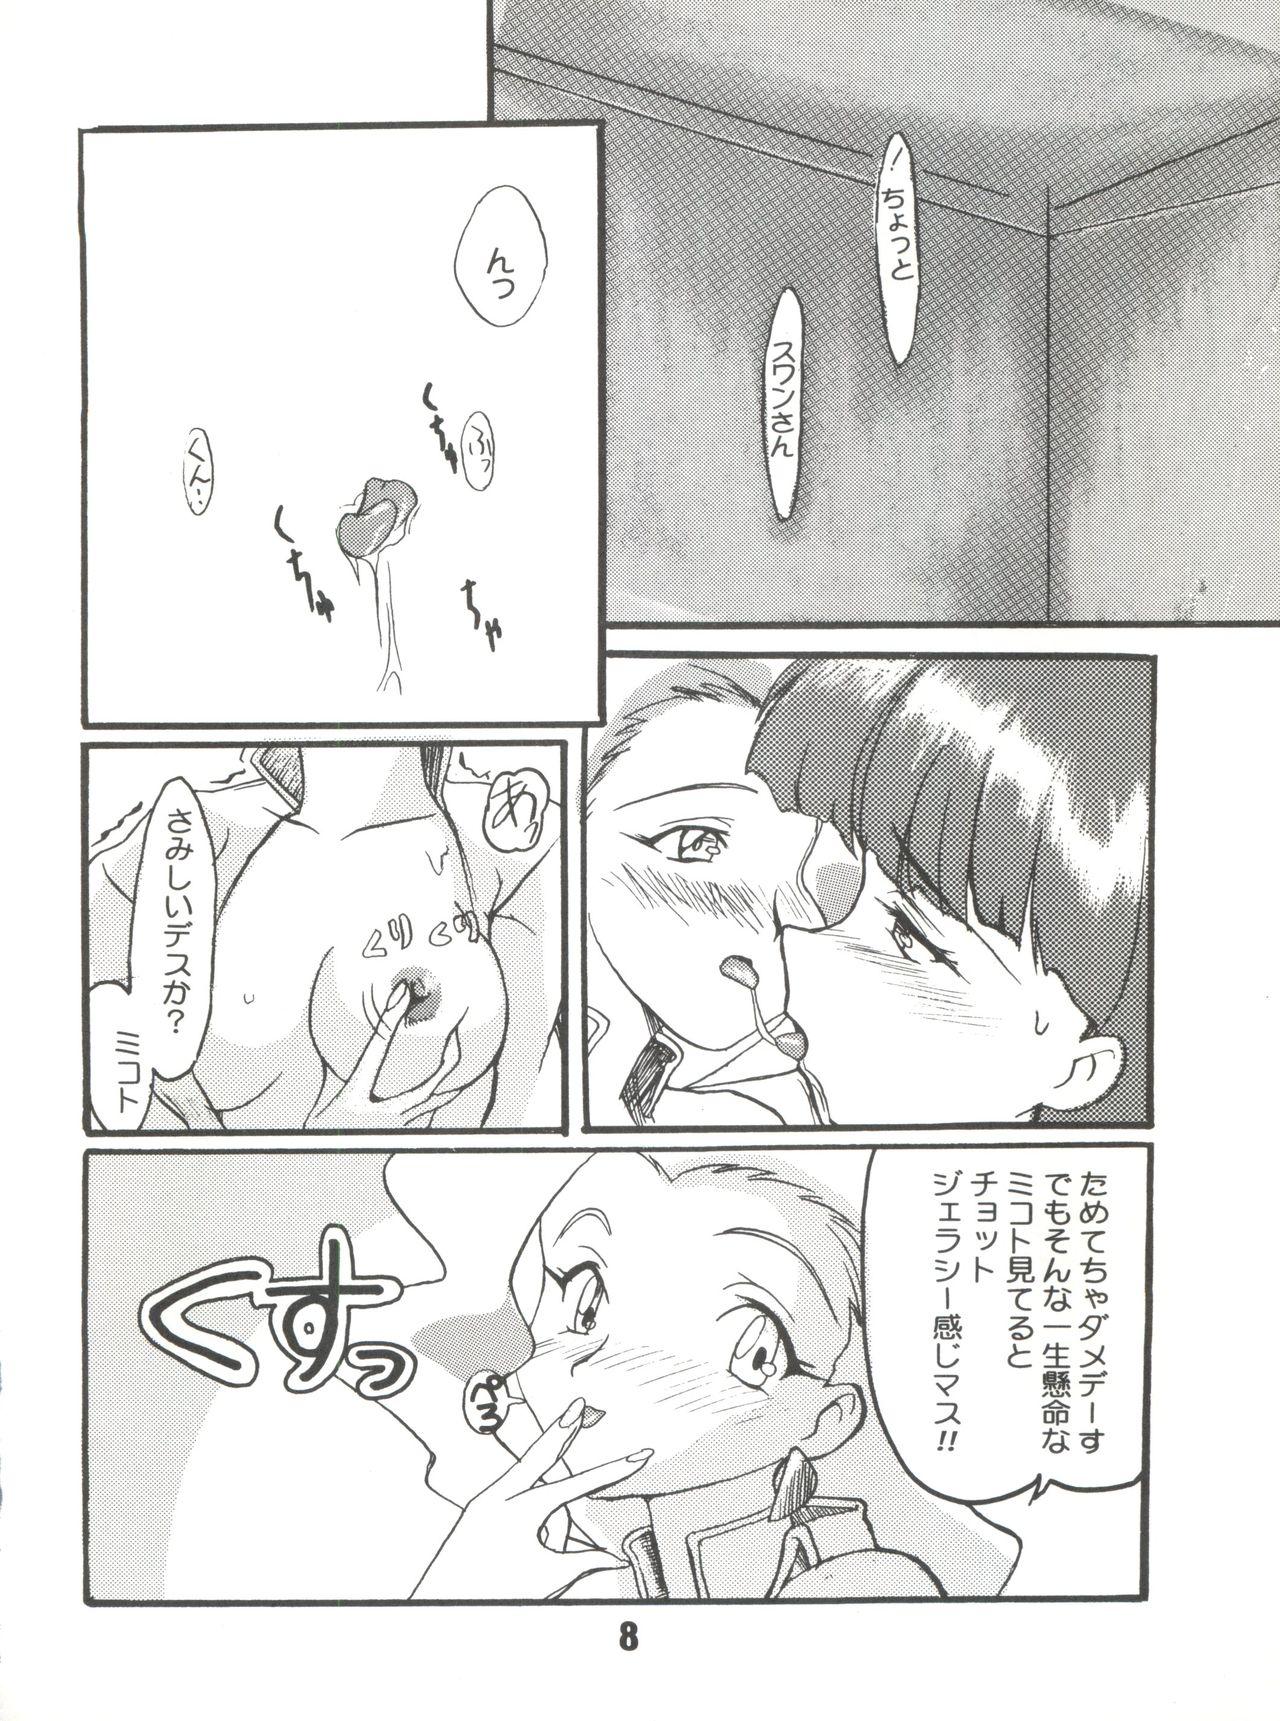 Sextoy Sophia GGG - Gaogaigar Amature - Page 7